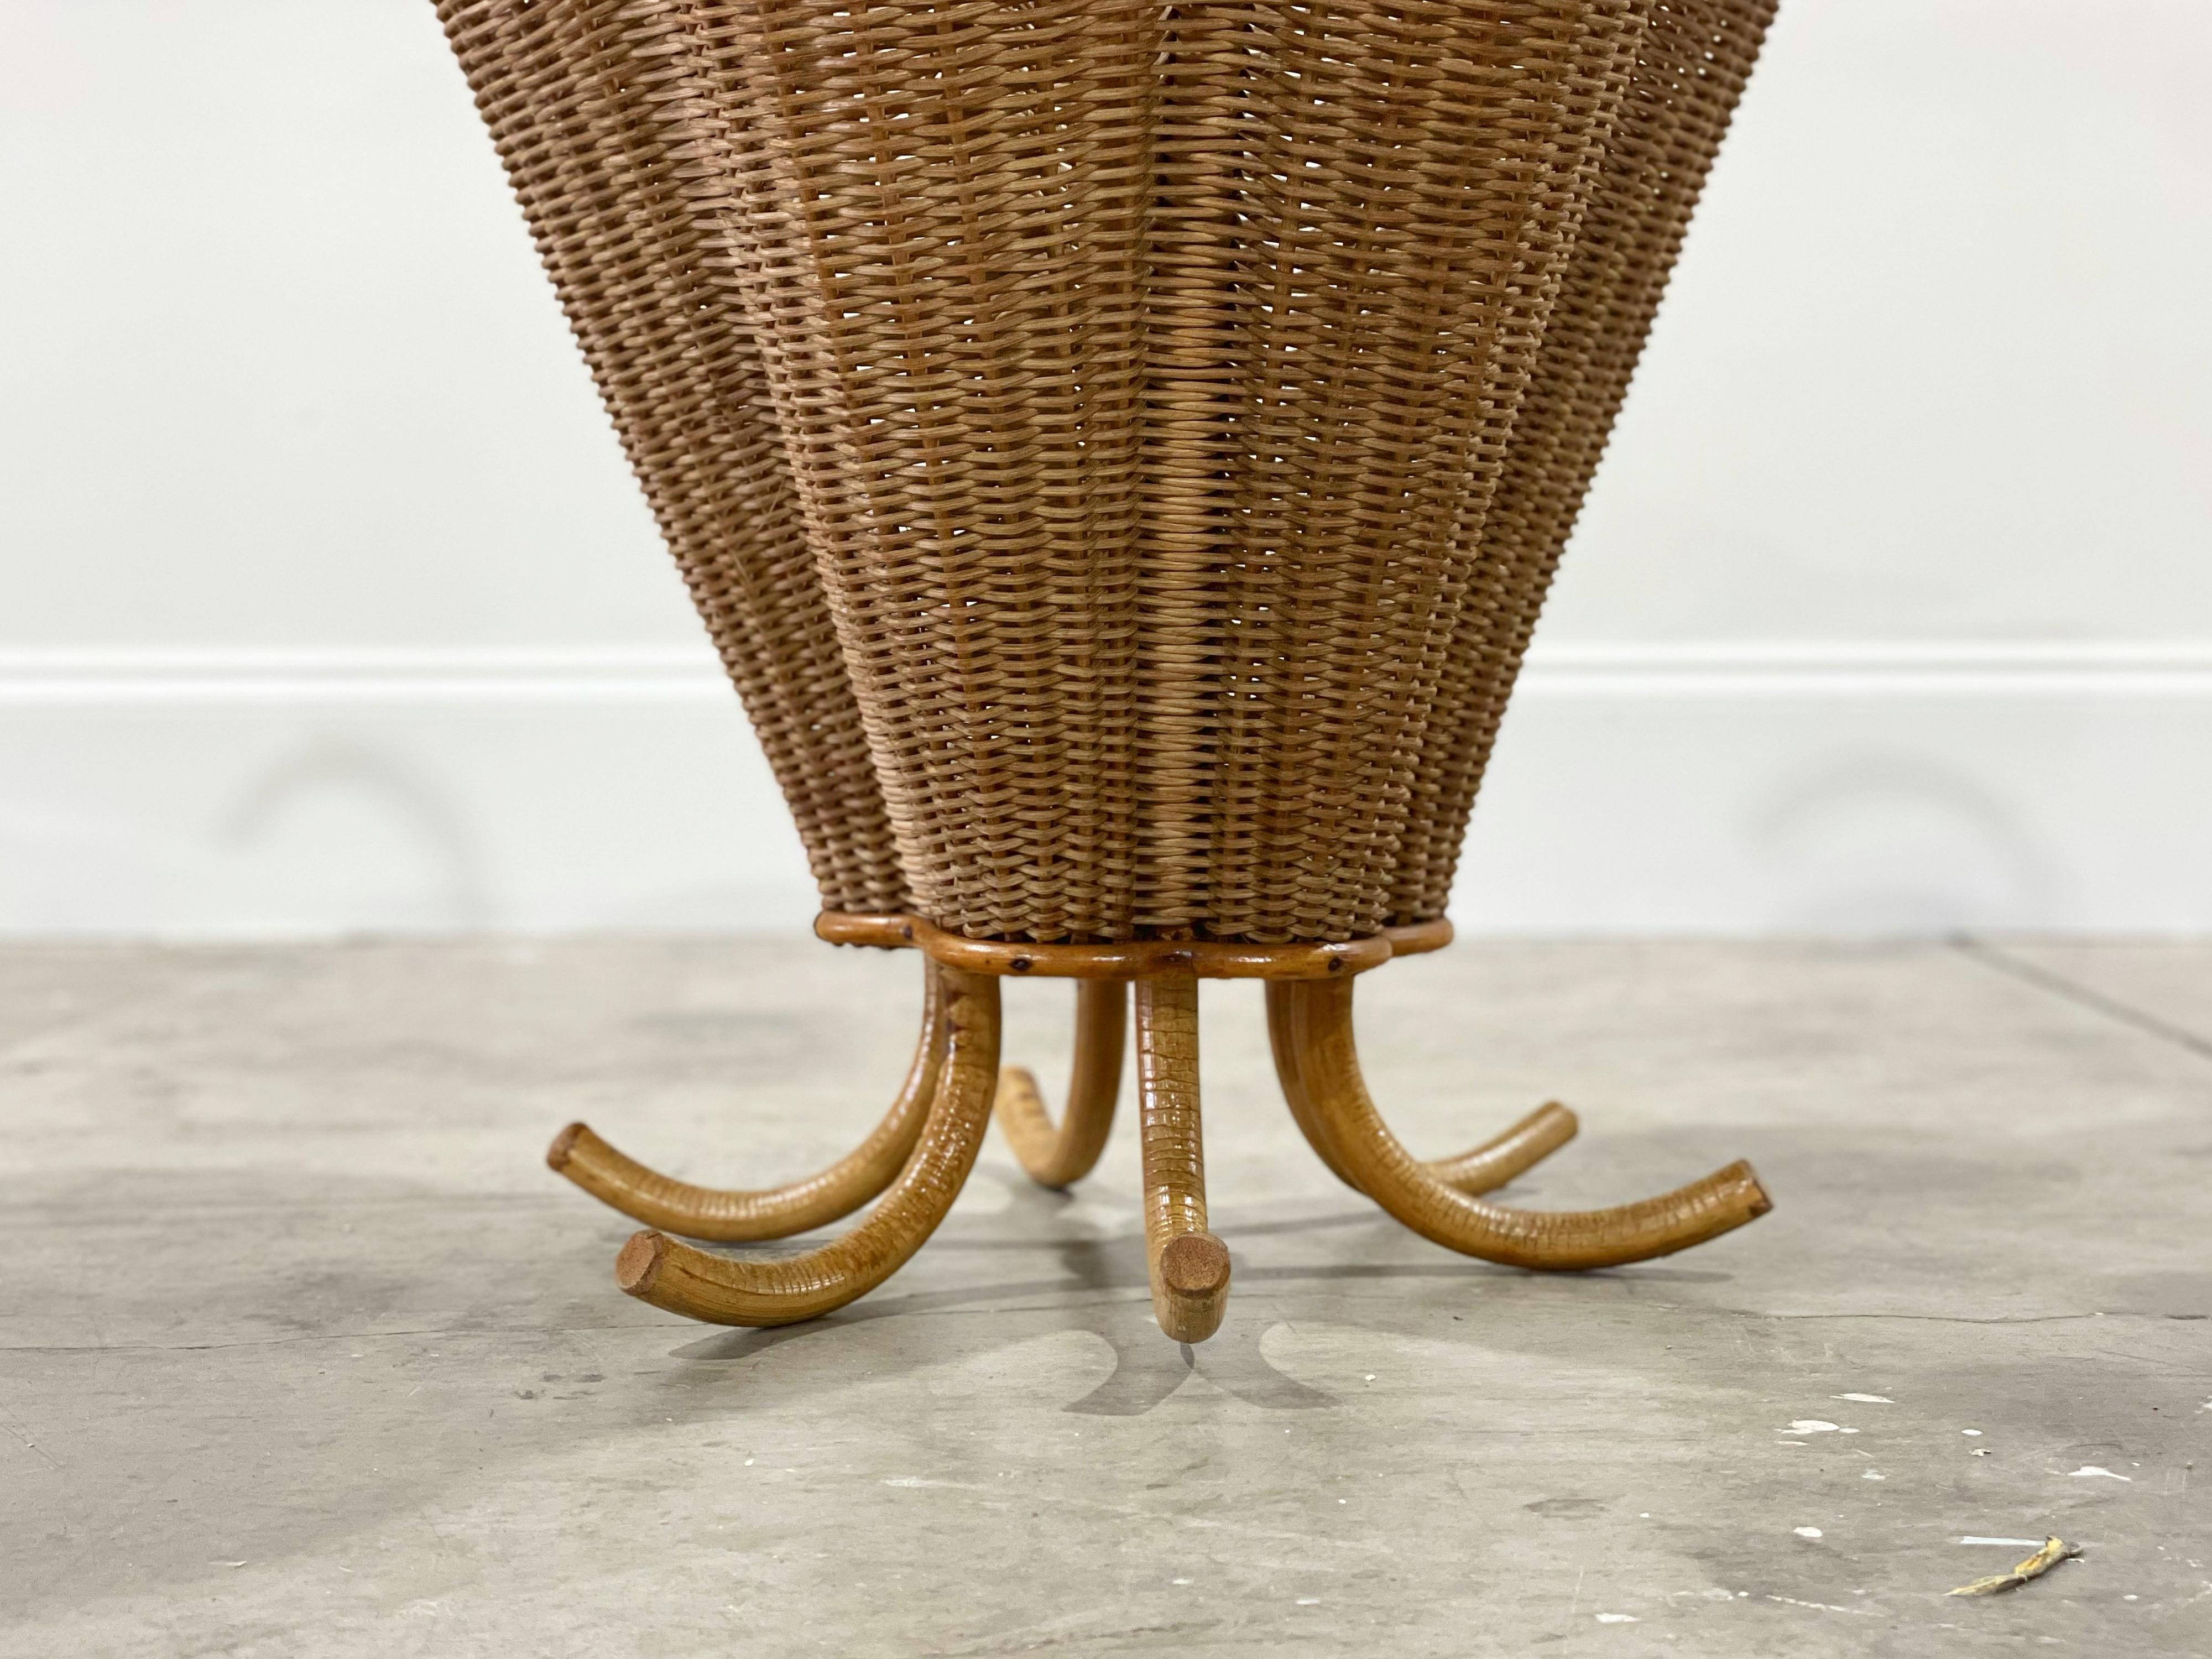 French Vintage Midcentury Rattan Wicker Umbrella Stand, France circa 1960s For Sale